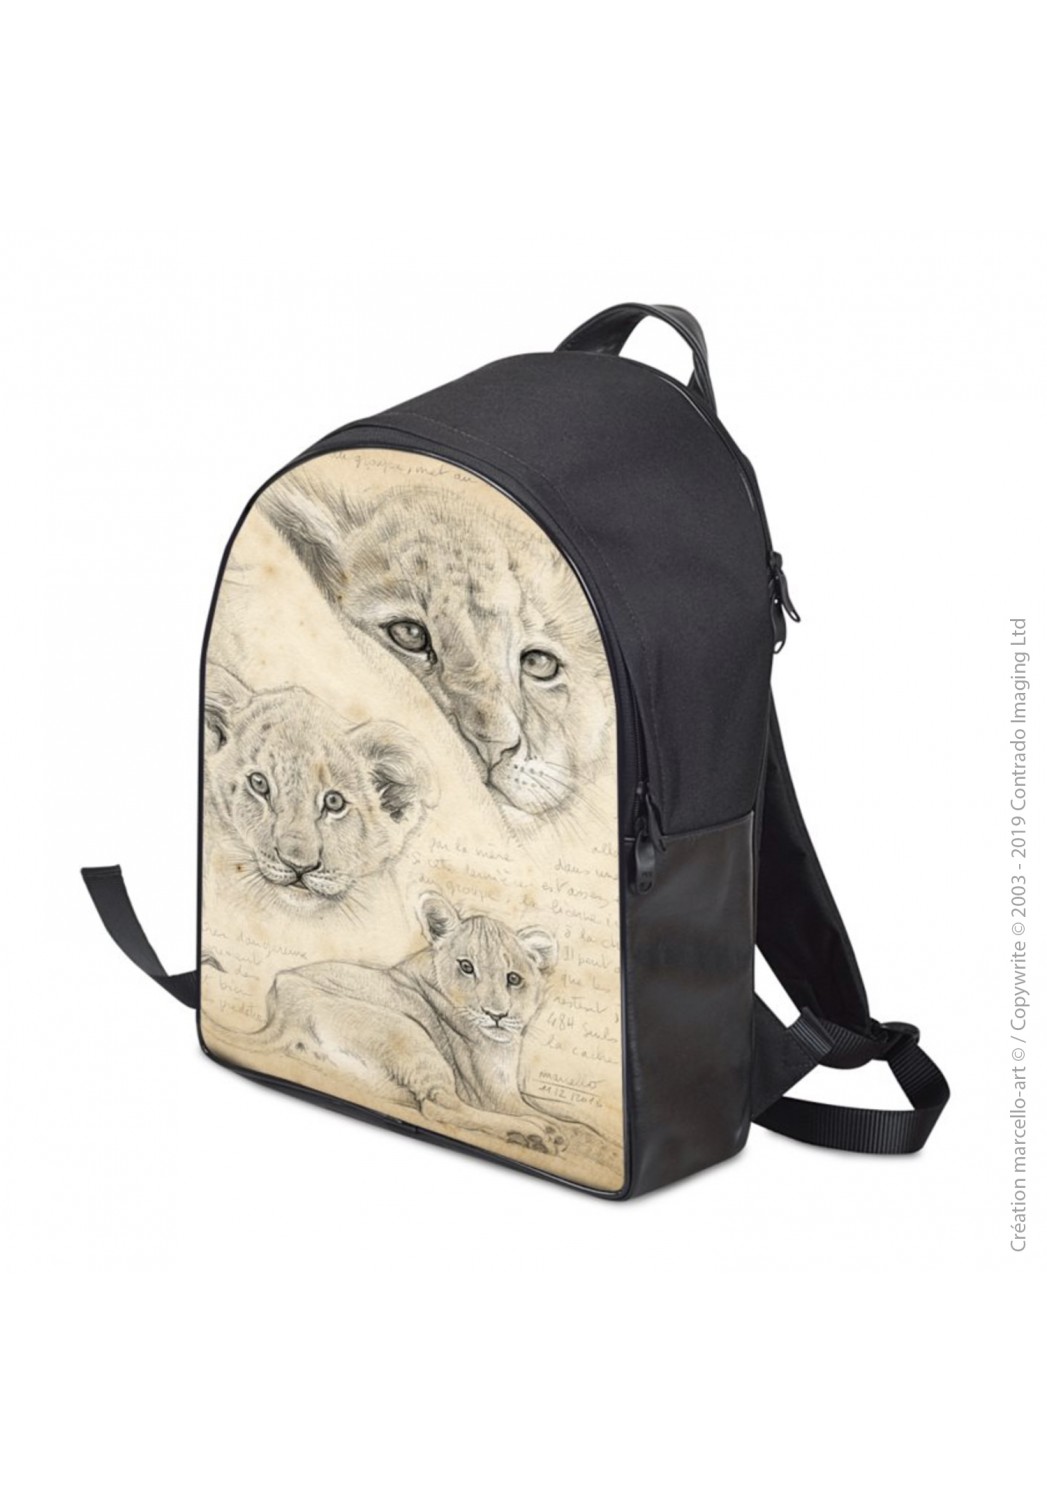 Marcello-art: Fashion accessory Backpack 330 lion cubs